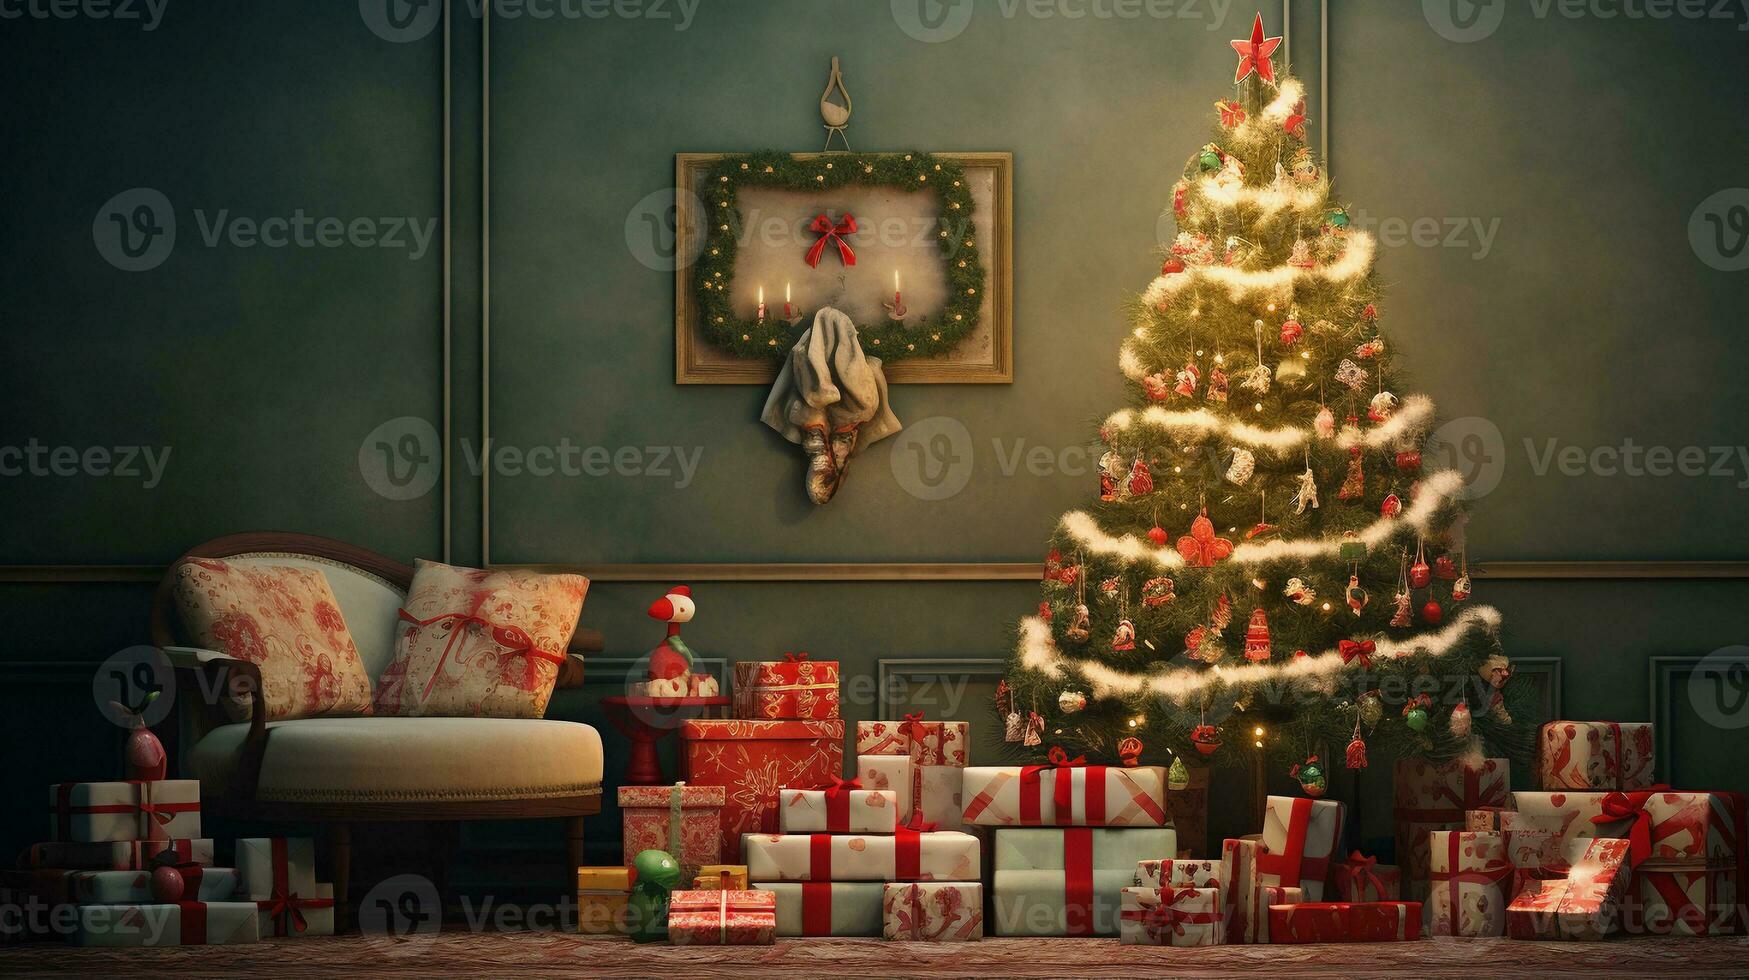 An artistic composition featuring Christmas gifts with textured, rustic accents in the background, creating a cozy and inviting scene for text to describe the anticipation of surprises. AI generated photo